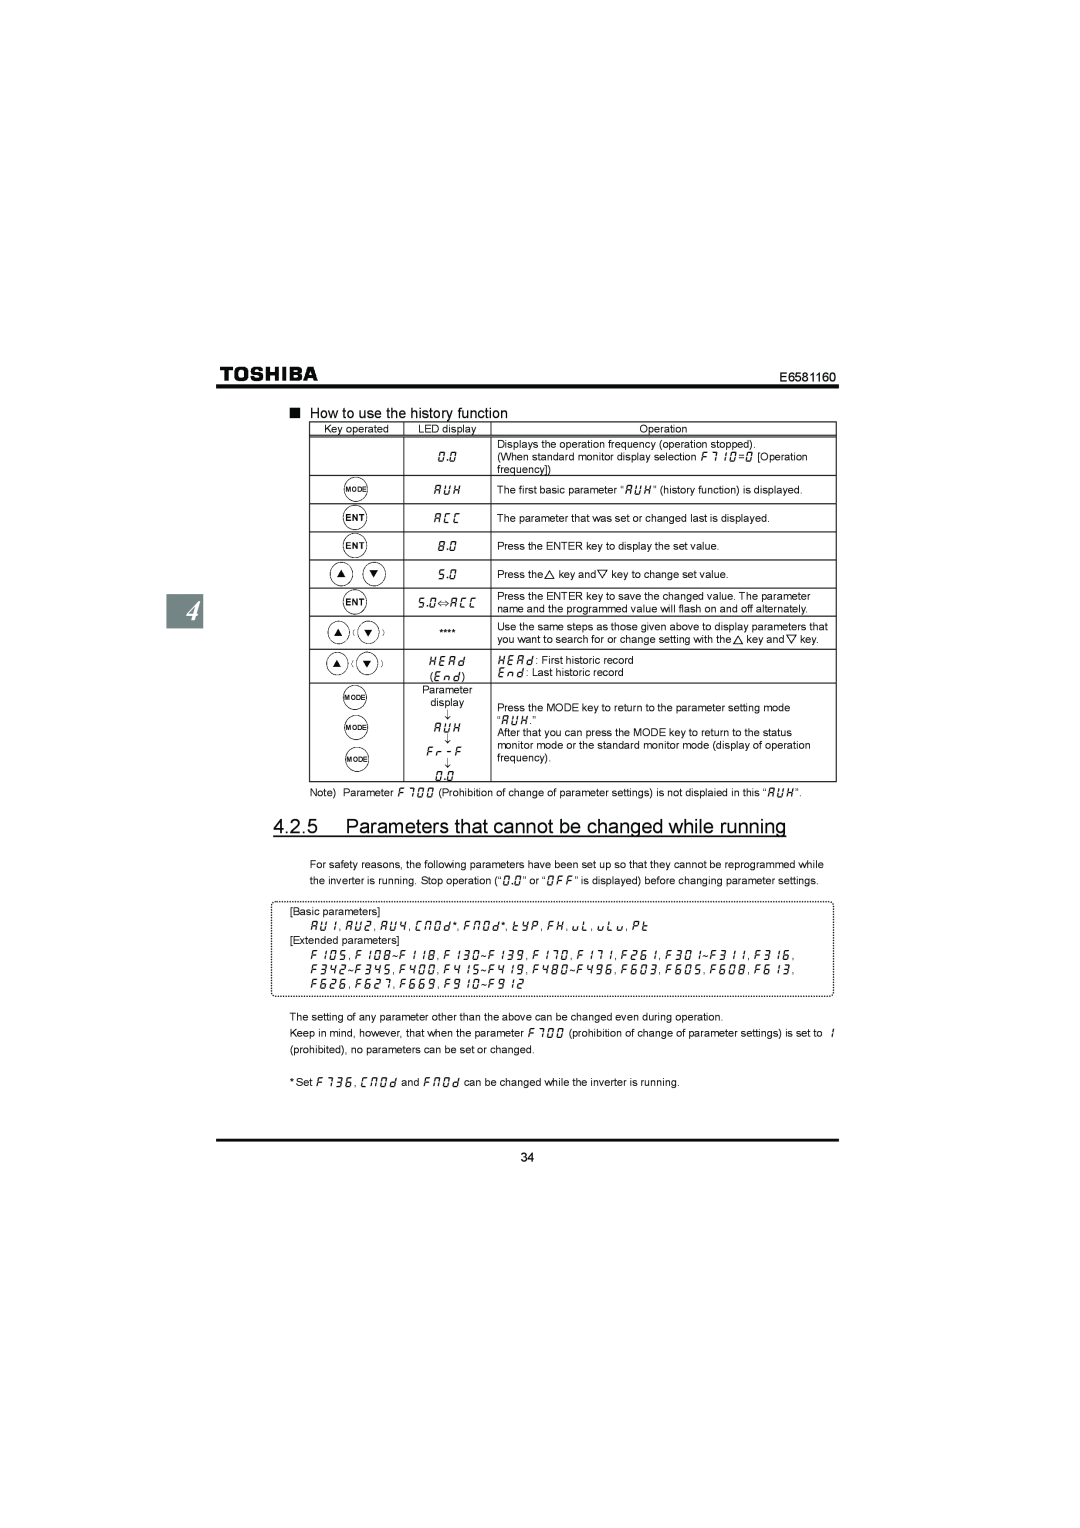 Toshiba VF-S11 manual QHow to use the history function, E6581160 